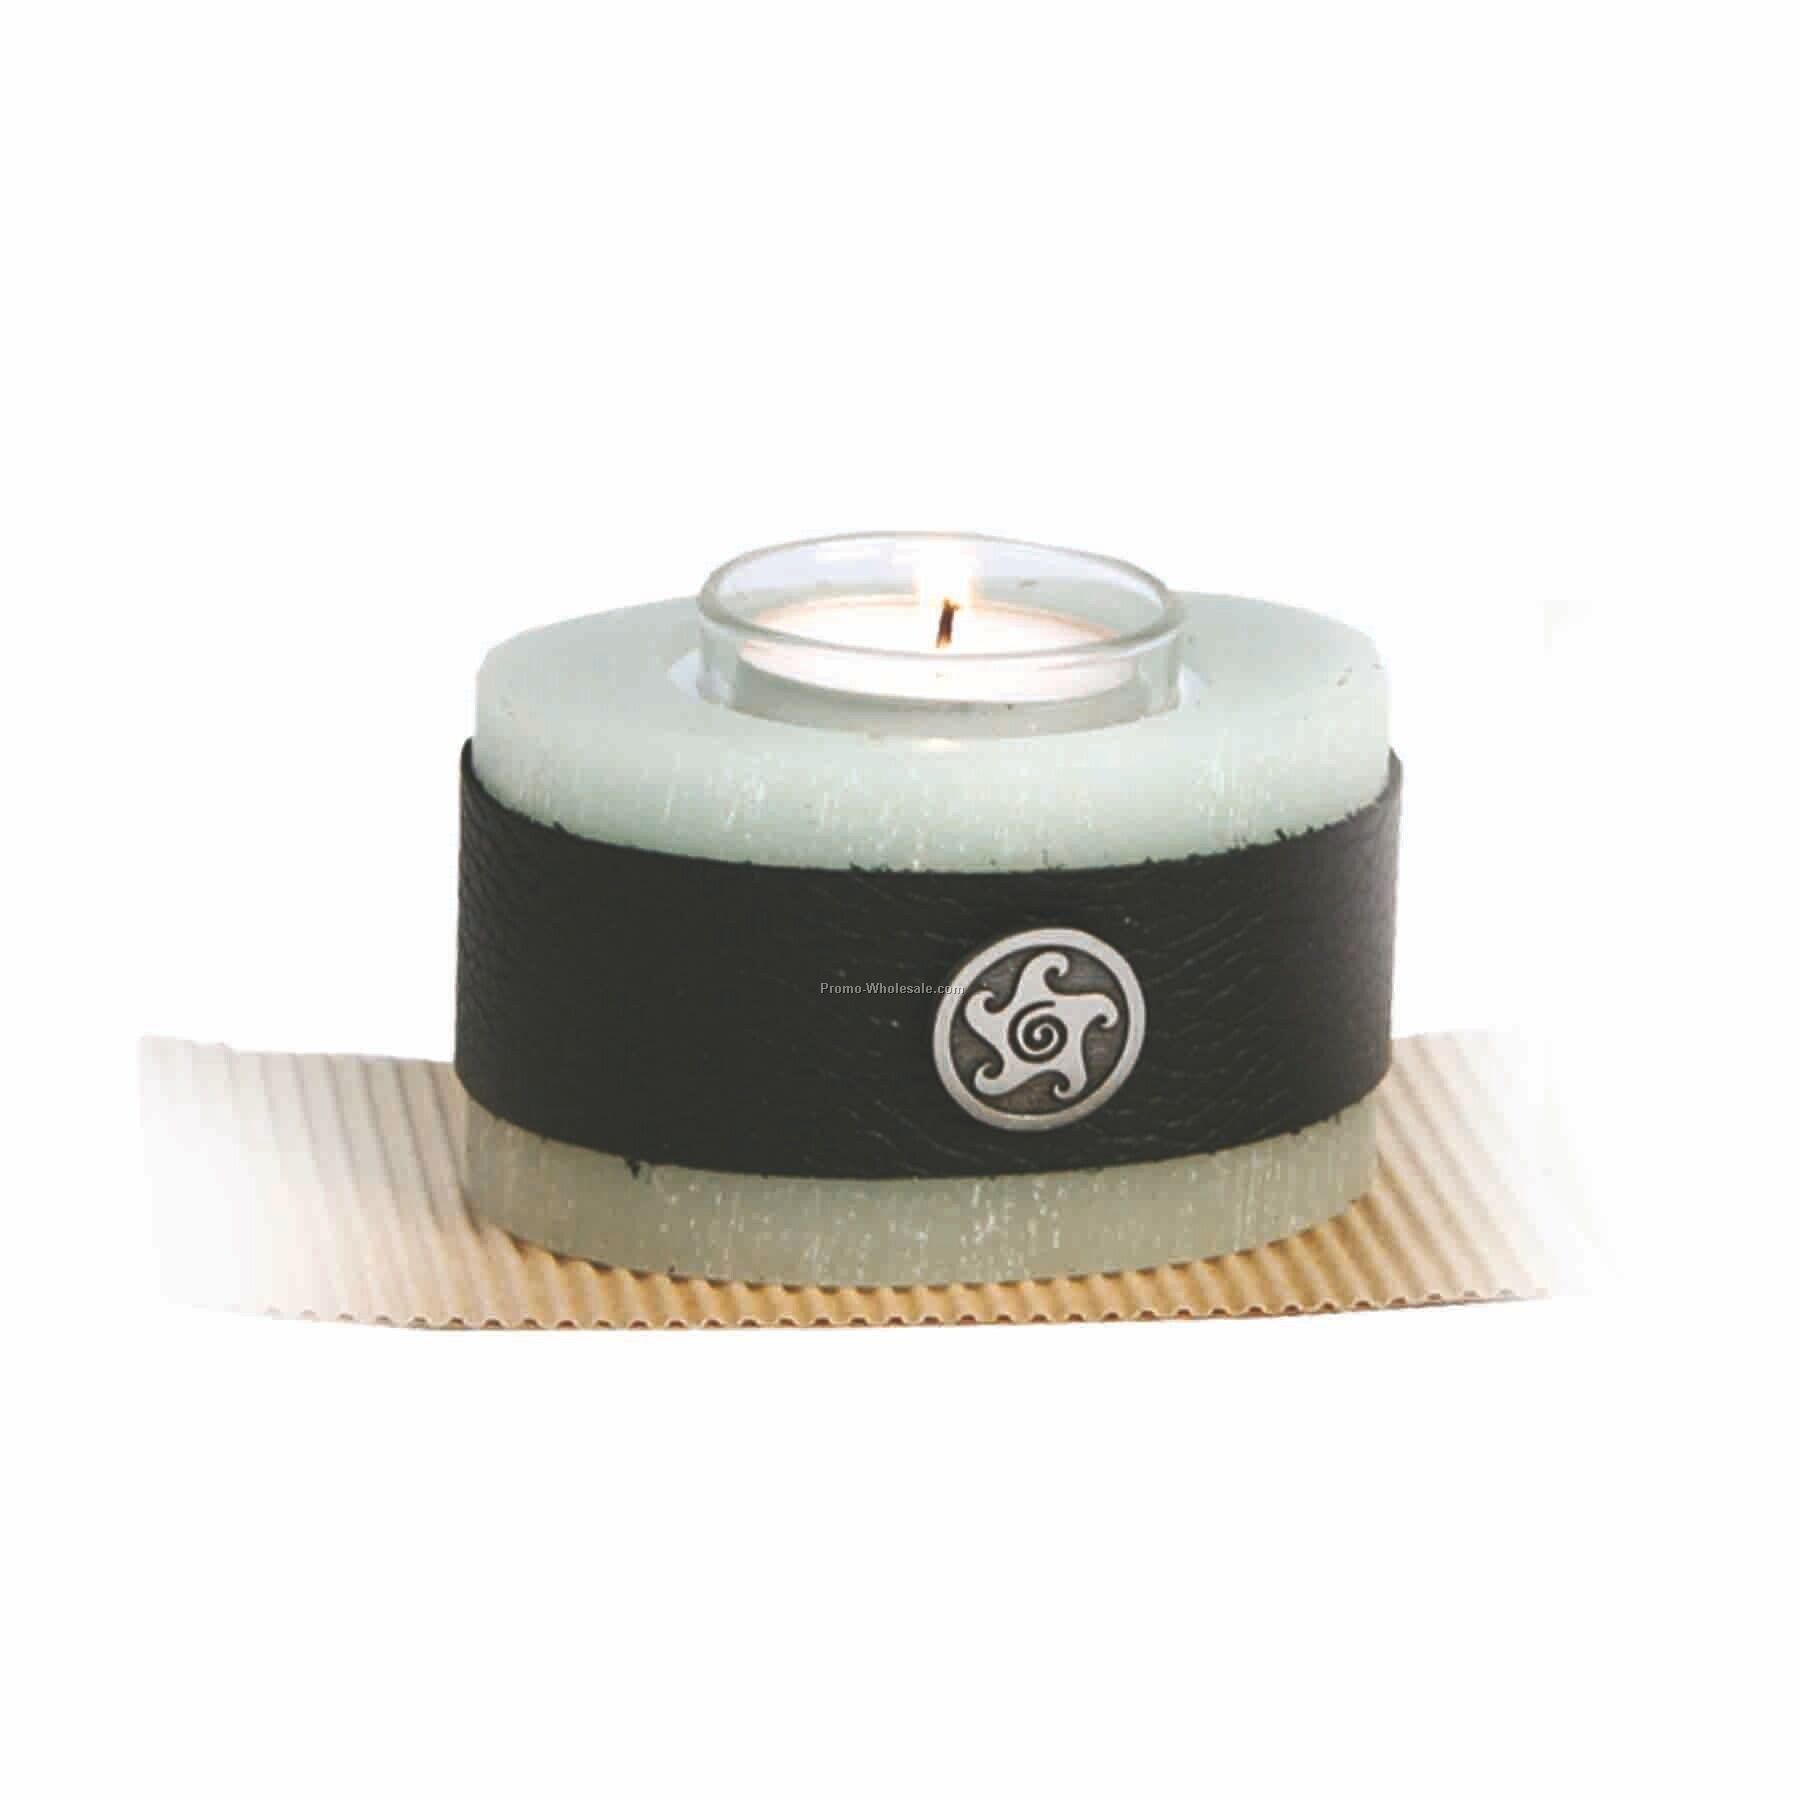 Single Candle, Leather Band Replaceable Tea Lights (Pewter Emblem)